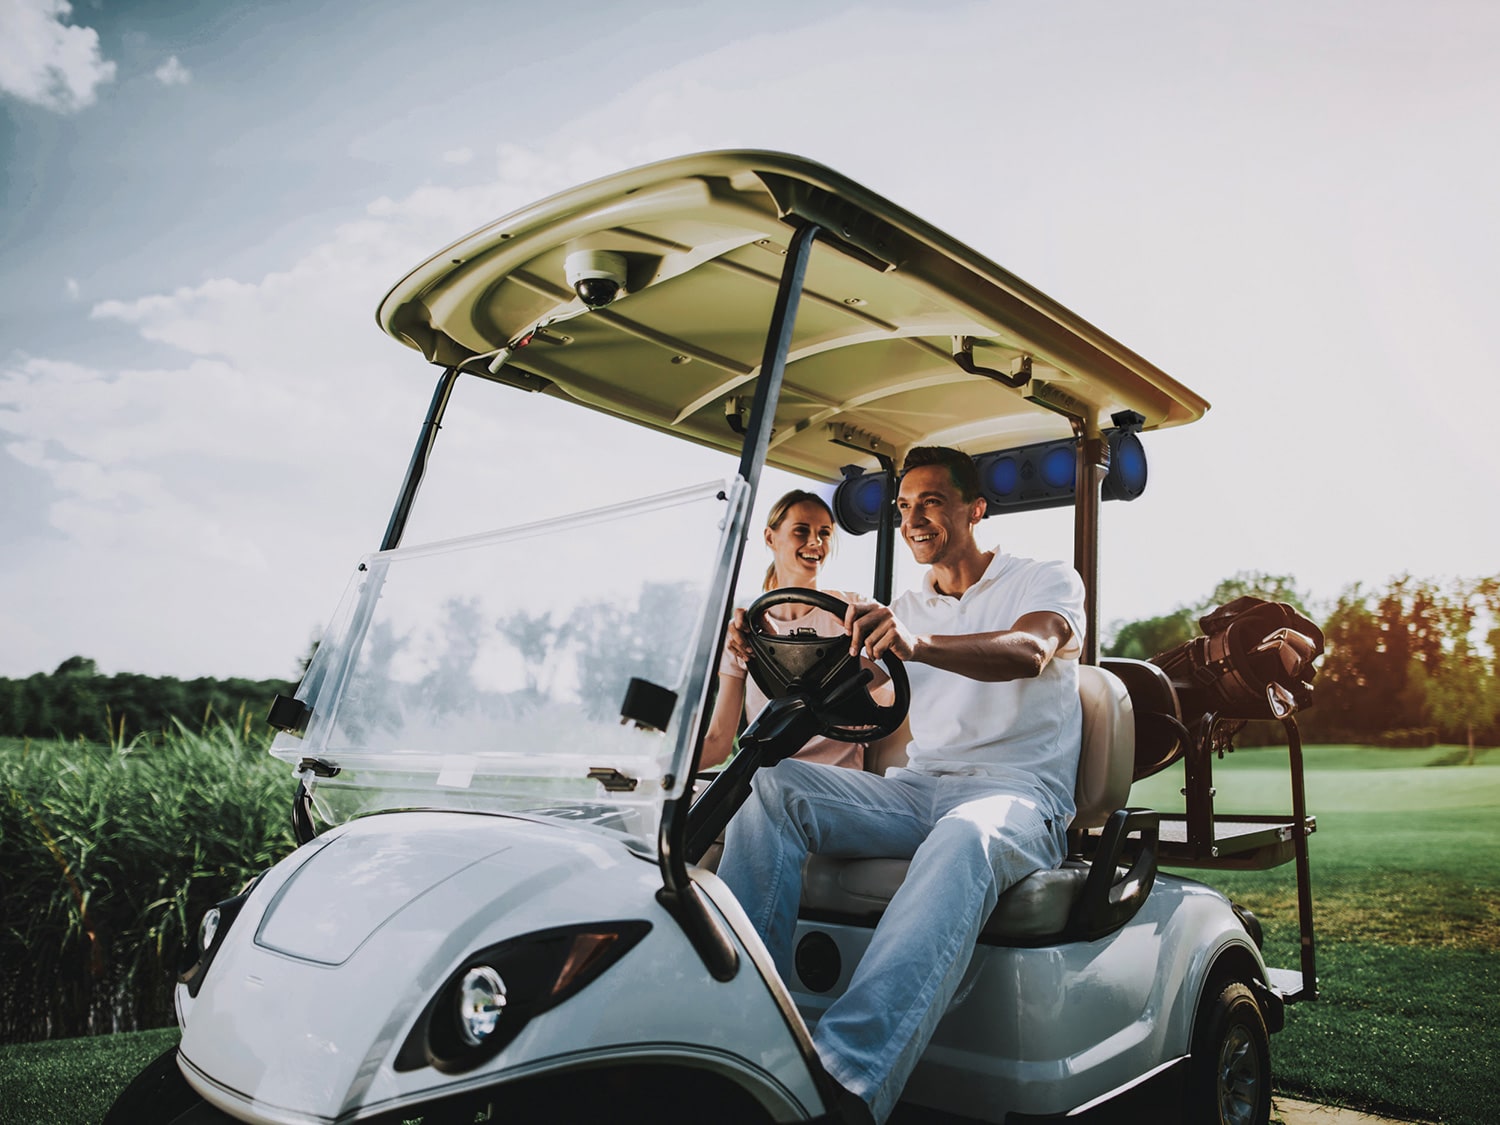 A couple in a golf cart listening to music on their SoundExtreme by ECOXGEAR wireless sound bar.